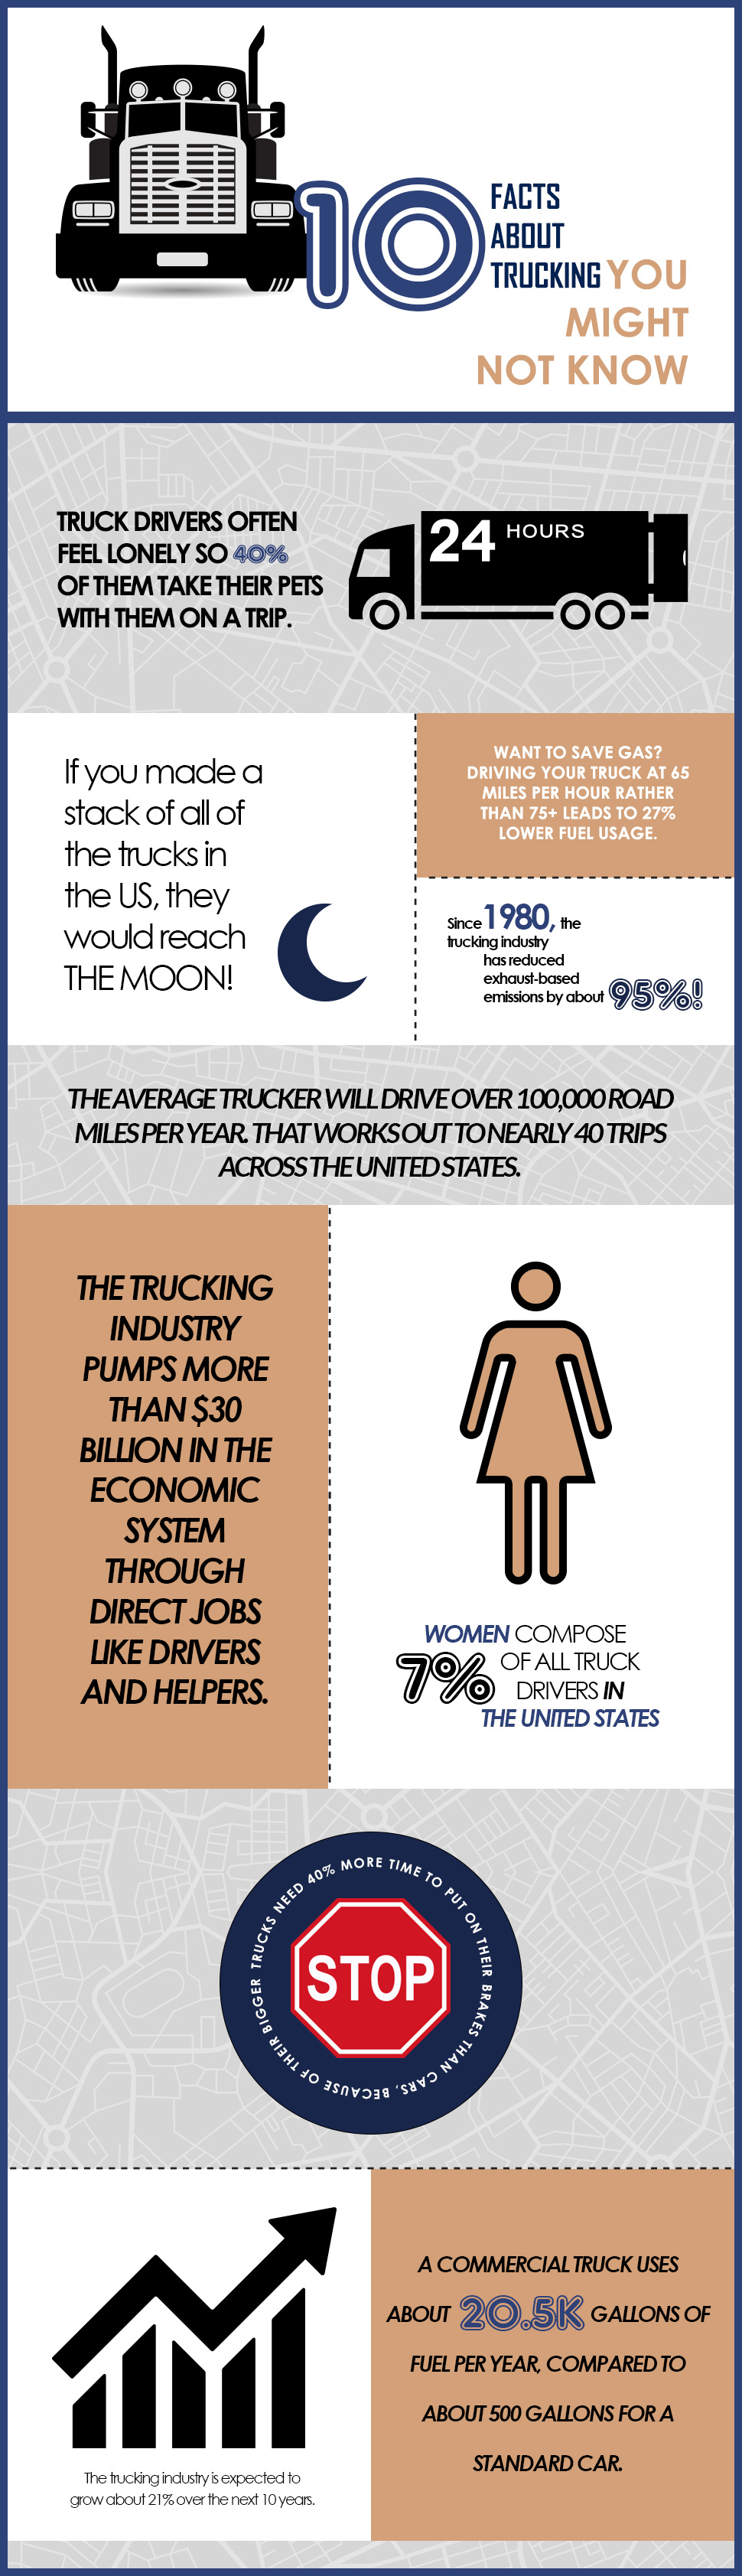 10 Facts About Trucking